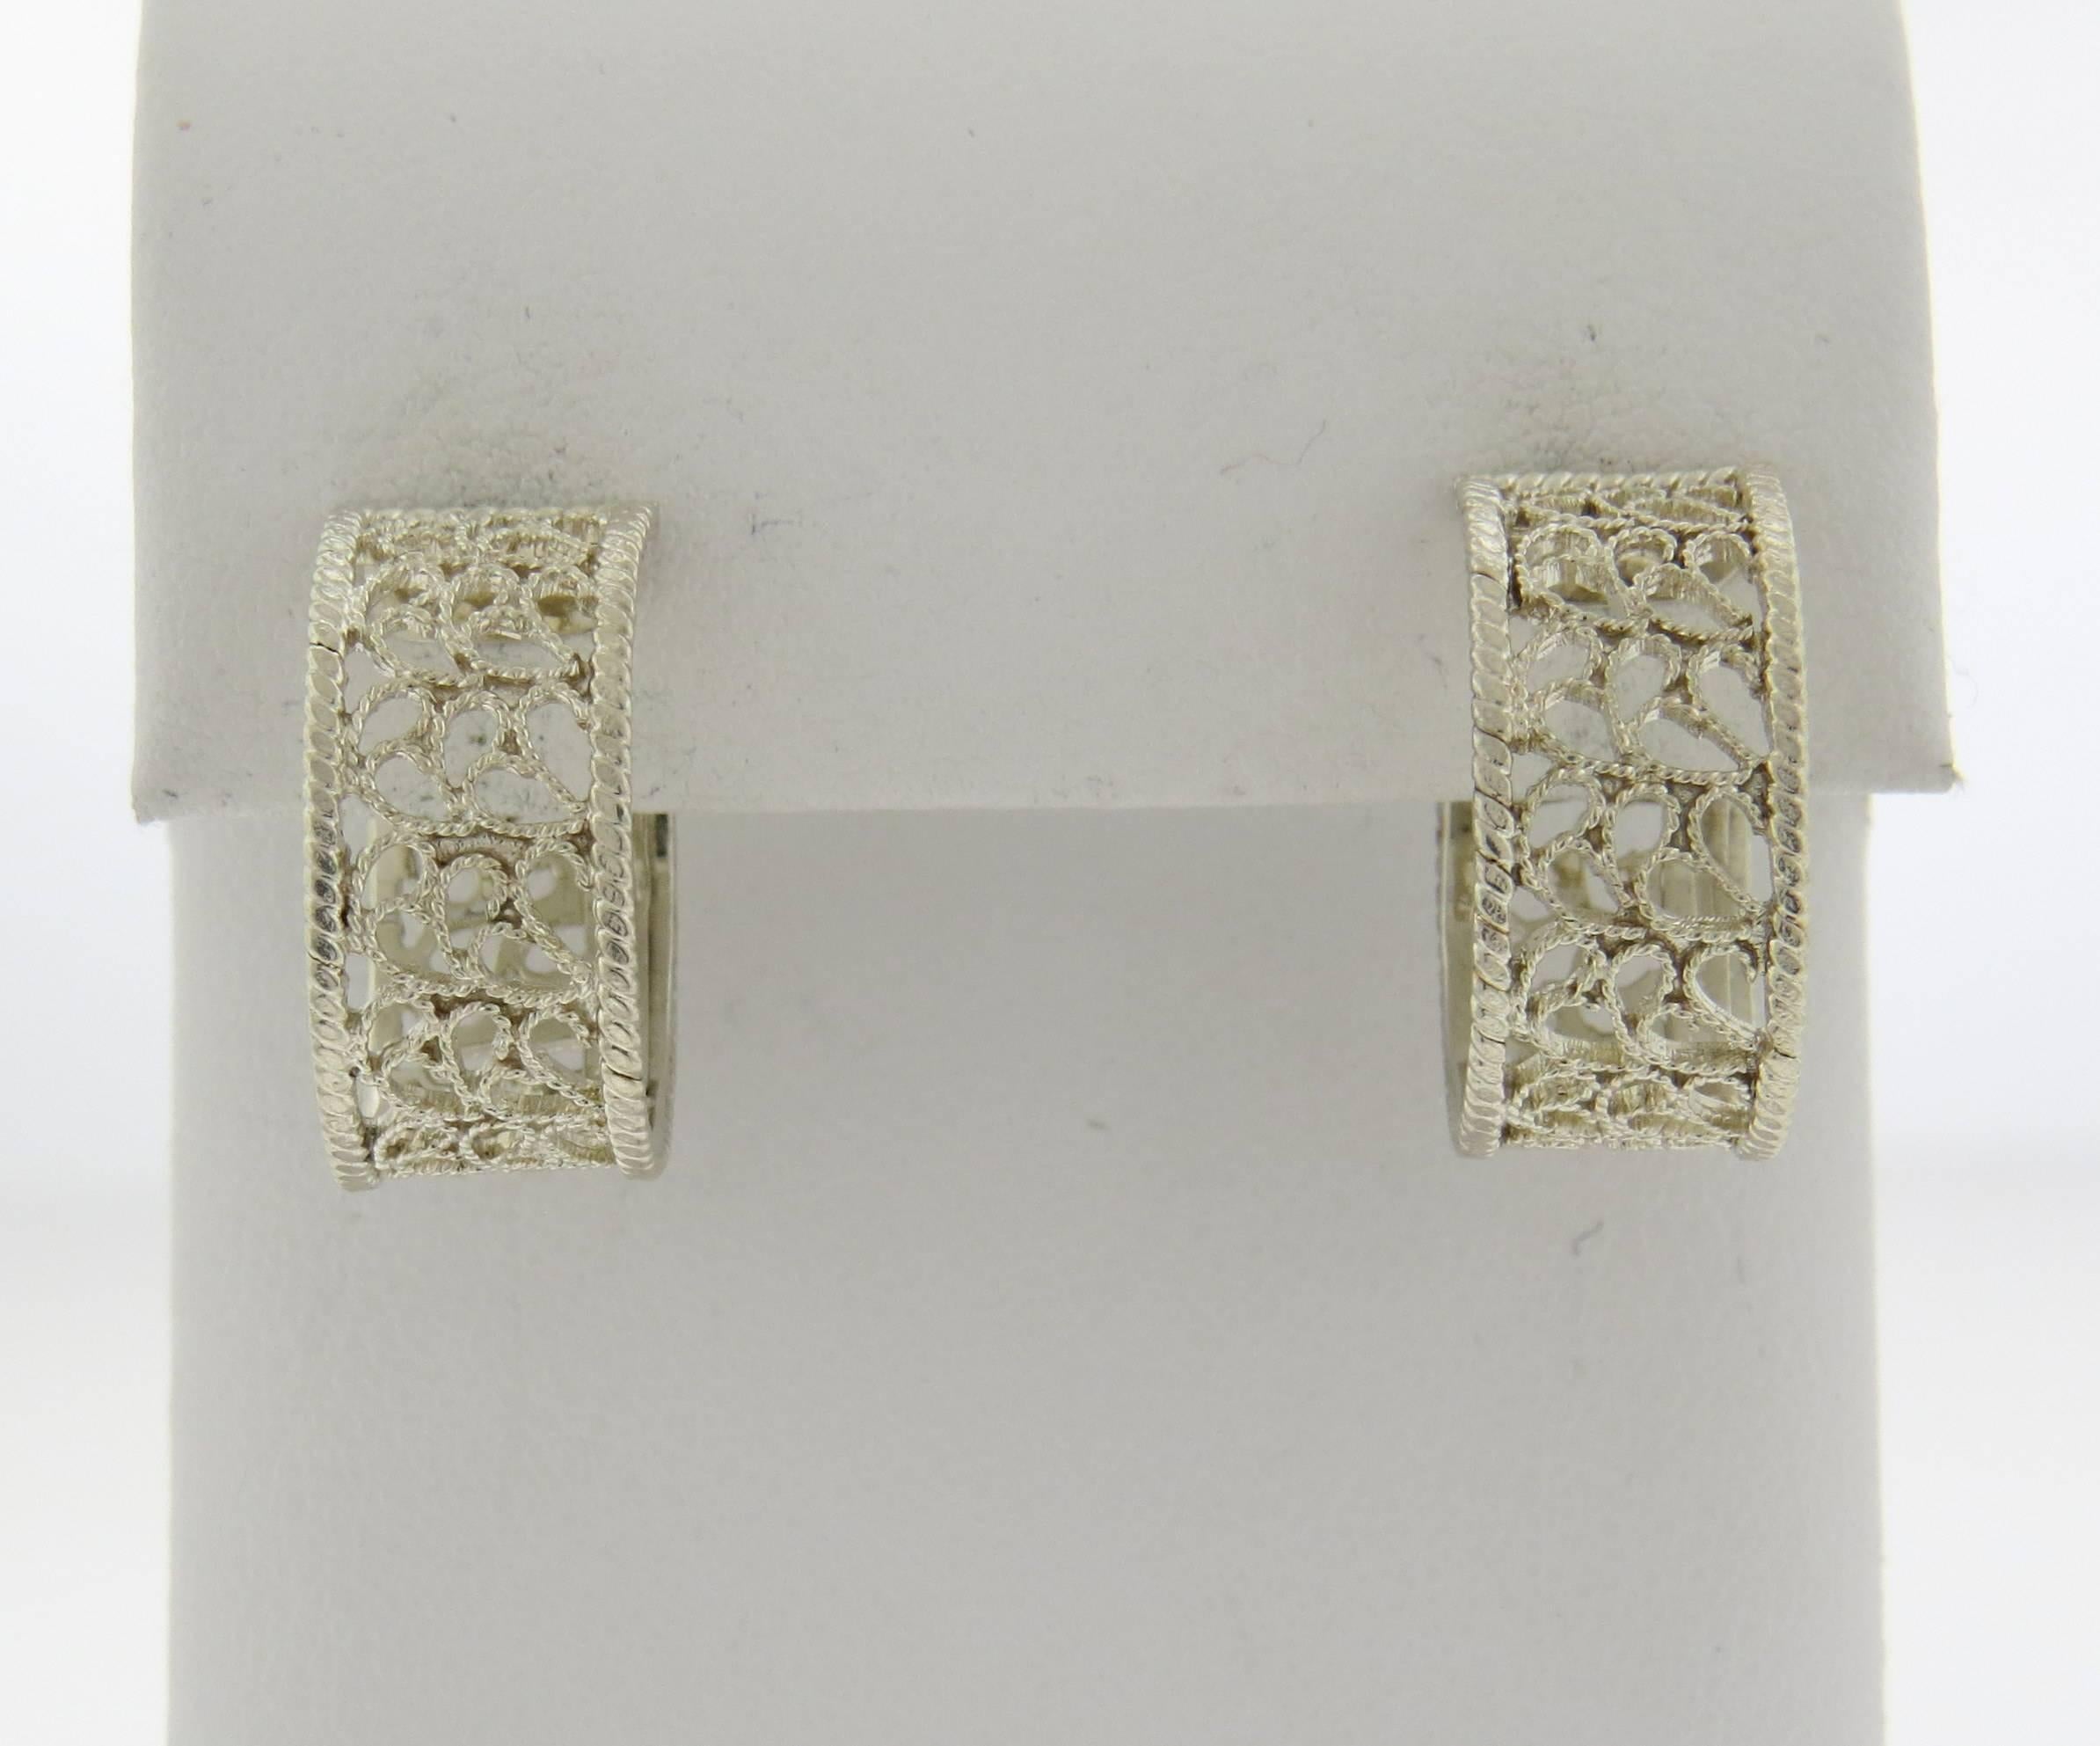 A pair of Silver hoop earrings by Buccellati.  The earrings measure 18.8mm x 9mm and weigh 5.1 grams.  Marked: Buccellati Italy 925.  Come with Buccellati paperwork.